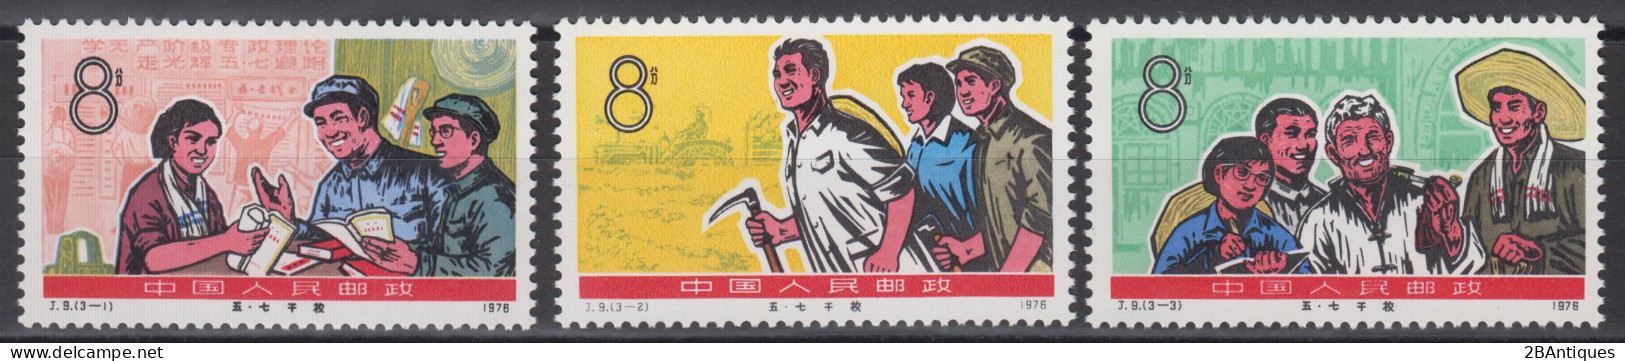 PR CHINA 1976 - The 10th Anniversary Of Mao's "May 7 Directive" MNH** OG XF - Ungebraucht